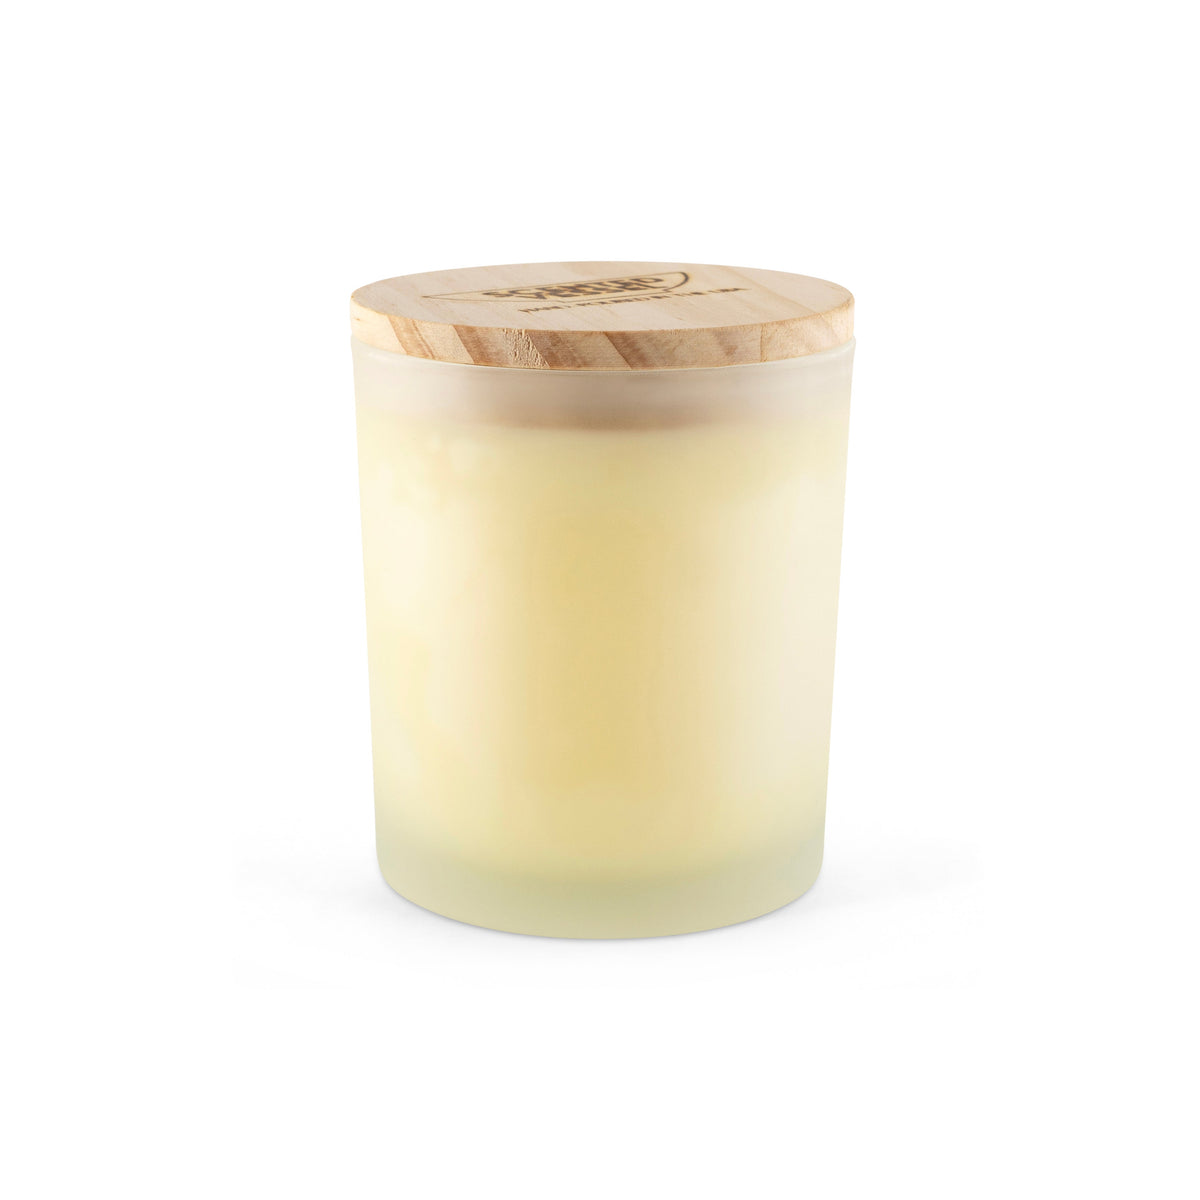 Hot Apple Pie 7.5oz Soy Wax Blend Candle by Scented Vessel